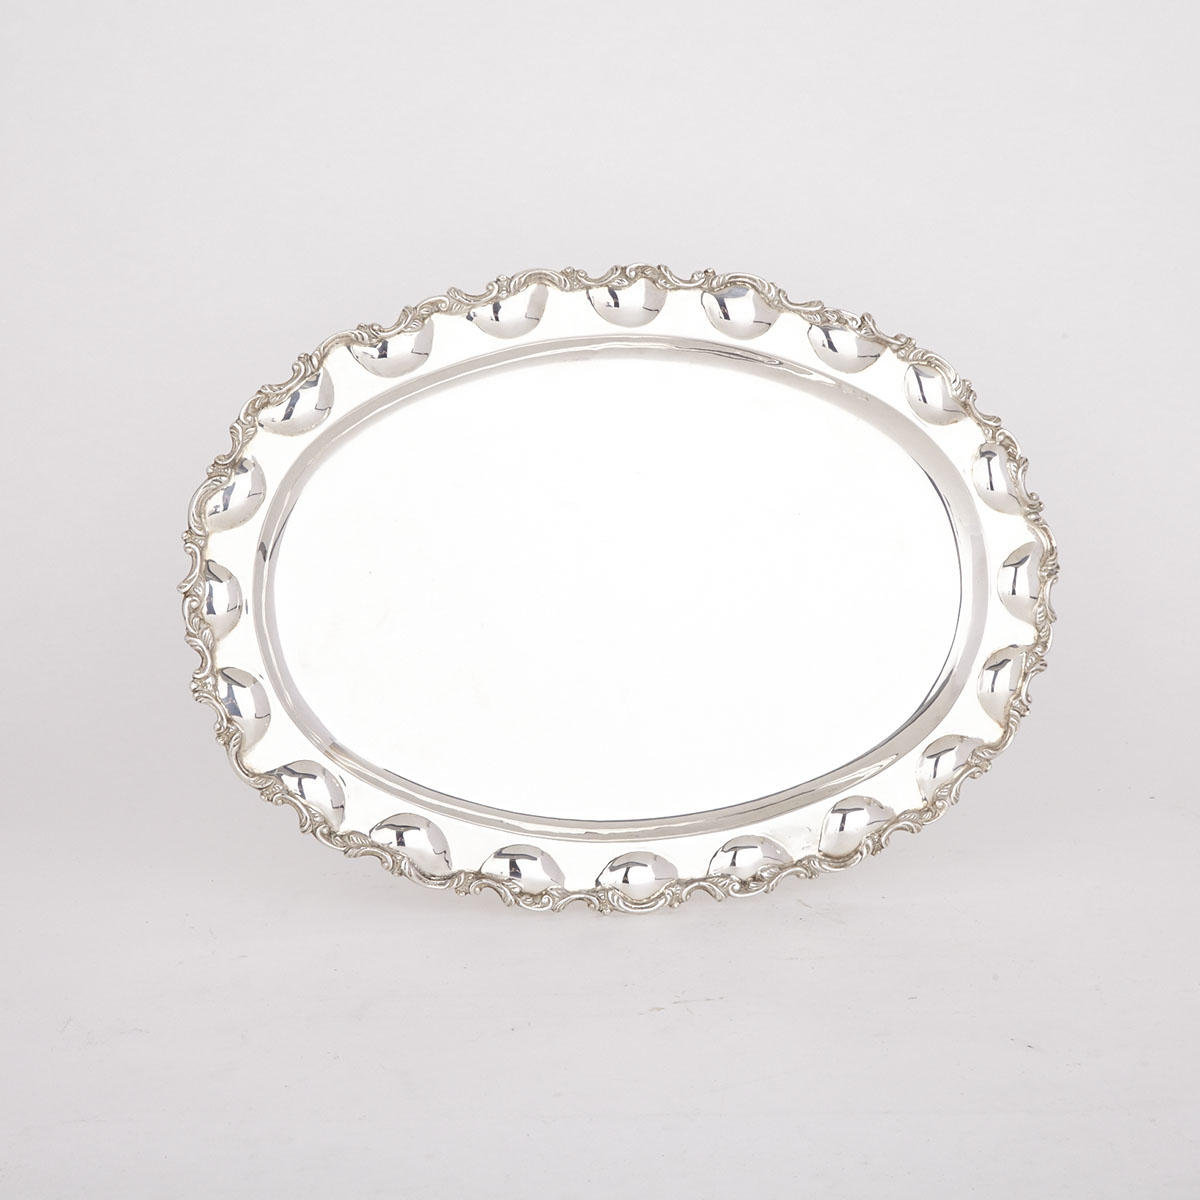 Mexican Silver Oval Platter, Juventino Lopez Reyes, Mexico City, mid-20th century